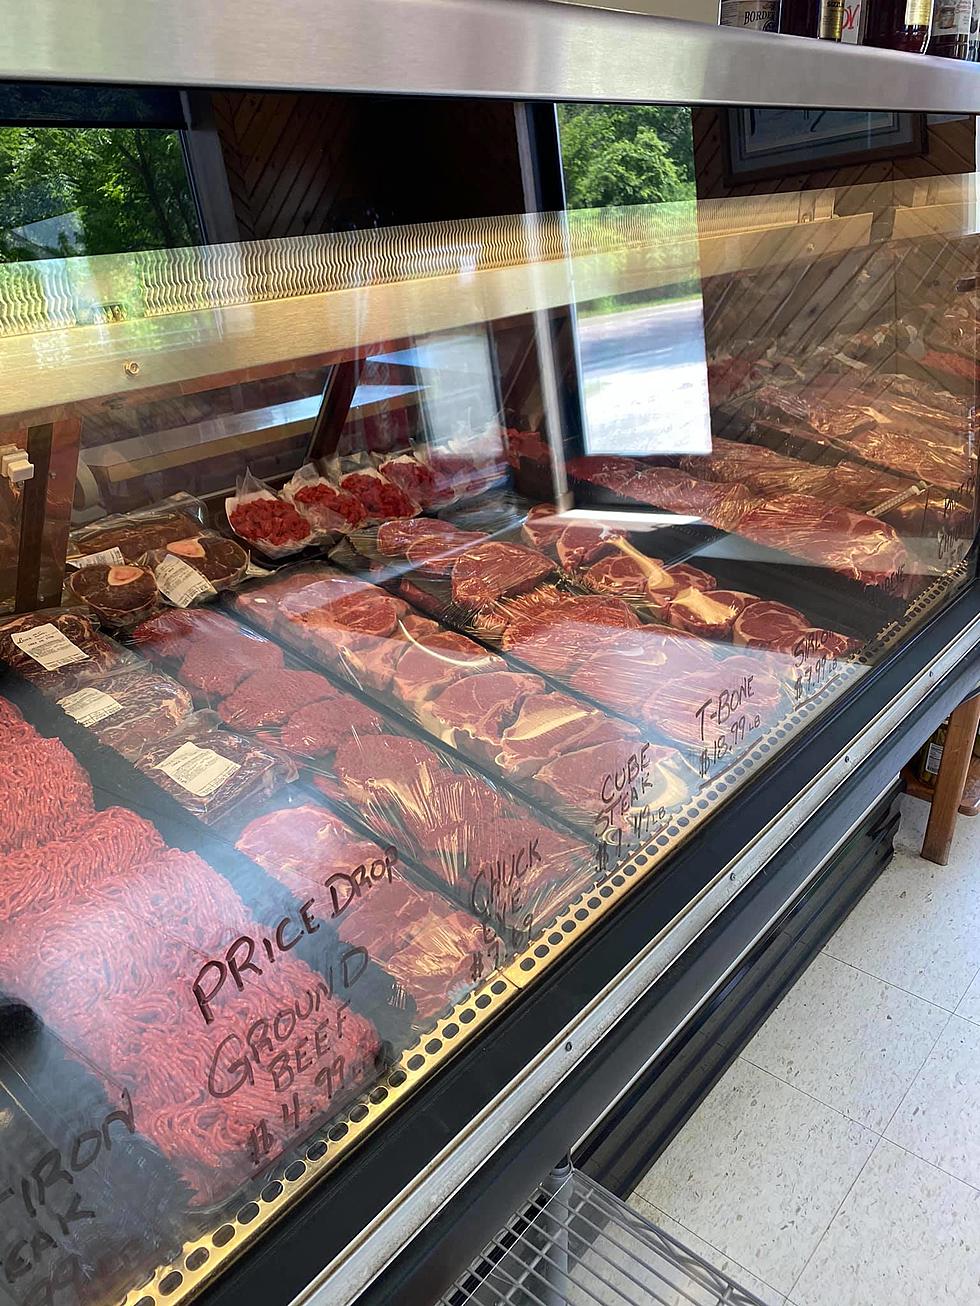 A Fantastic, High-Quality Meat Market is Making A Home In Waseca